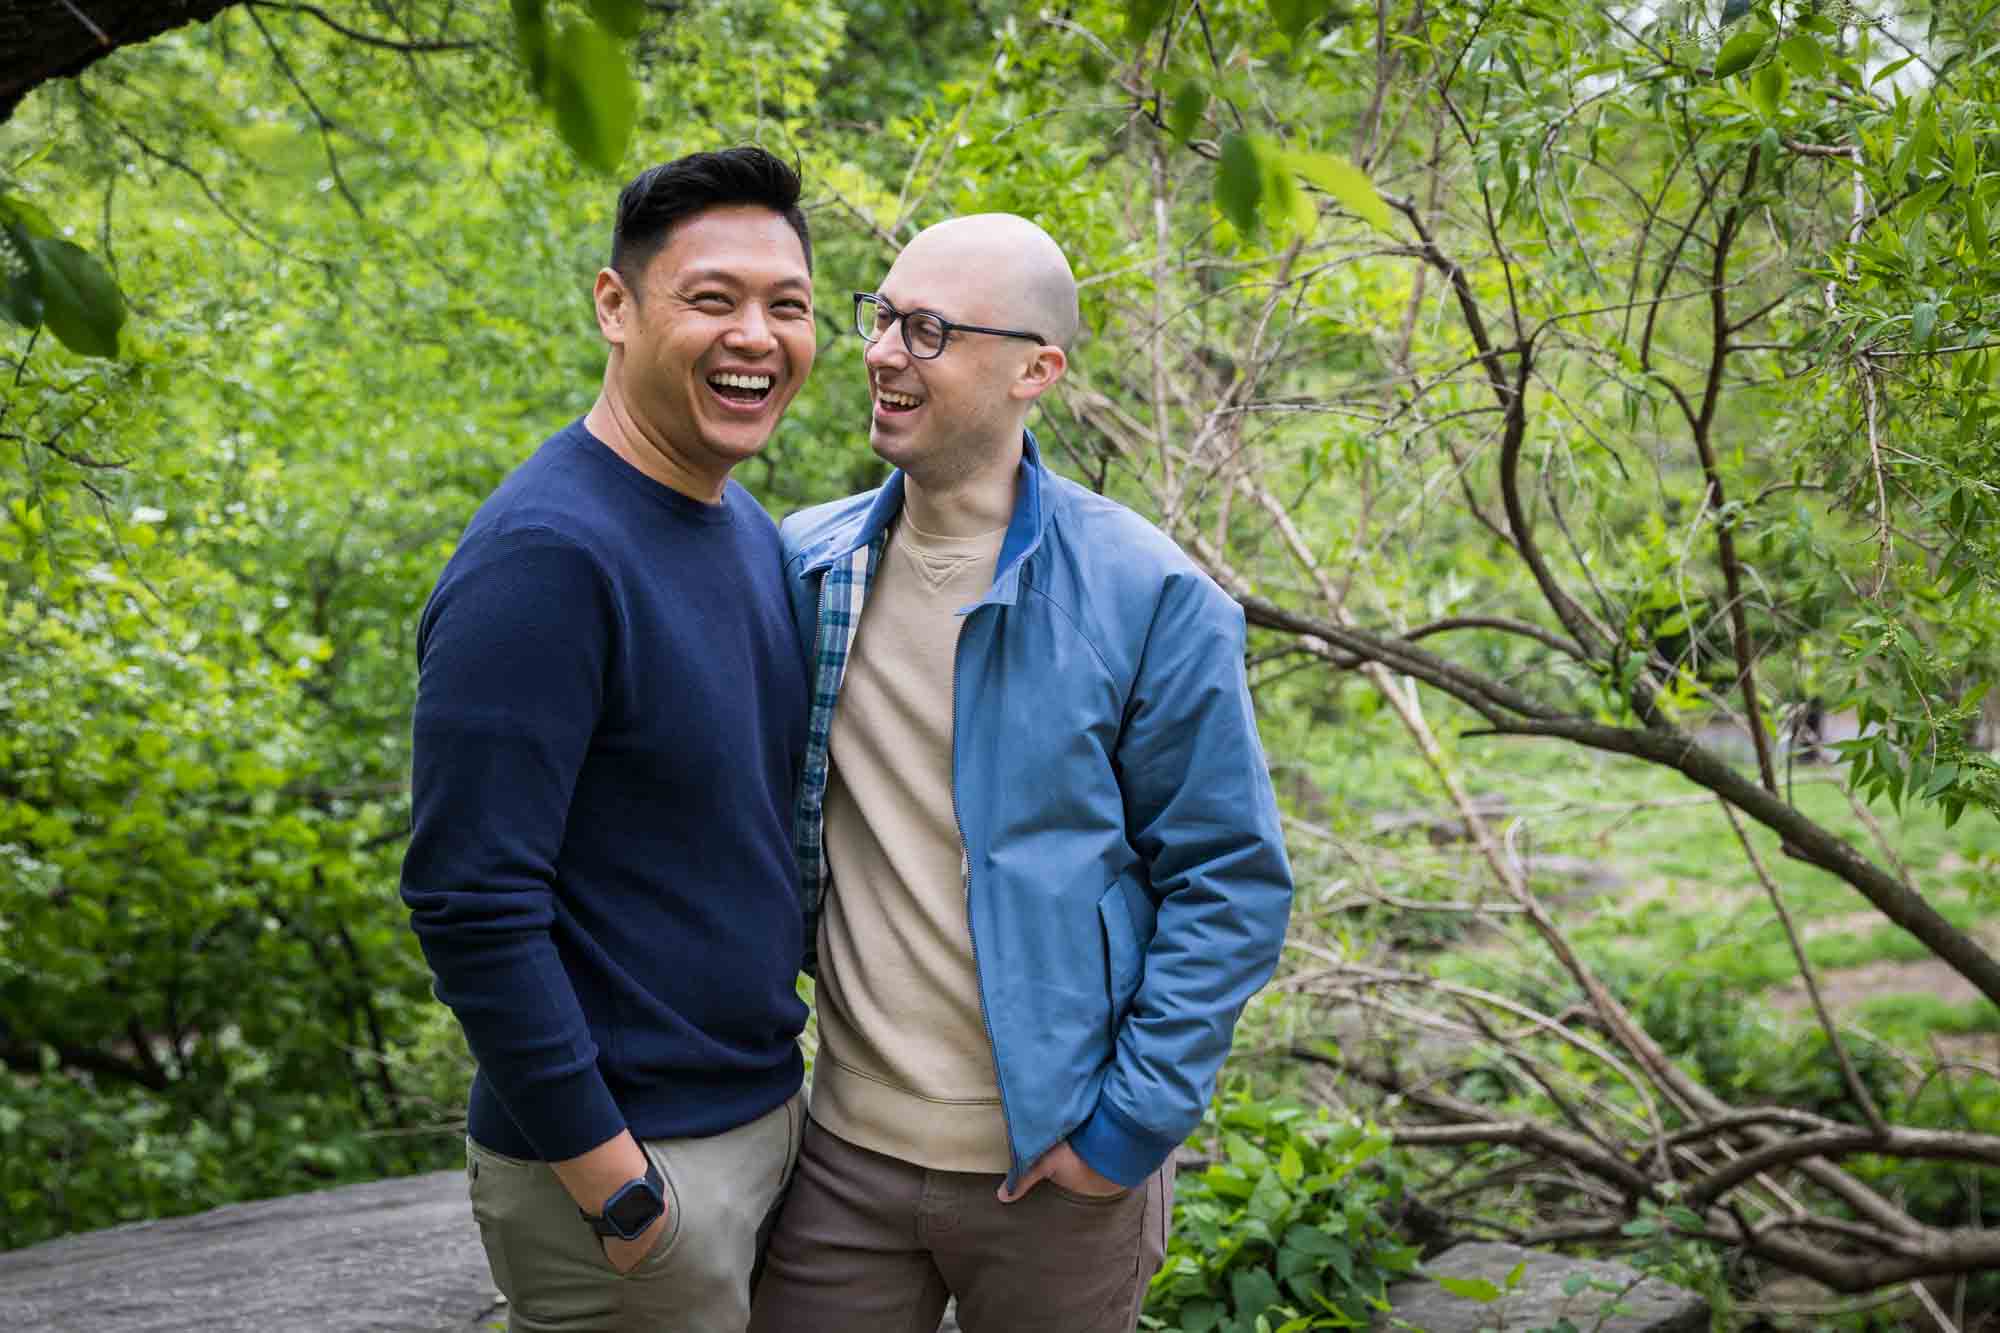 Two men dressed casually in forest from a Central Park engagement photo shoot